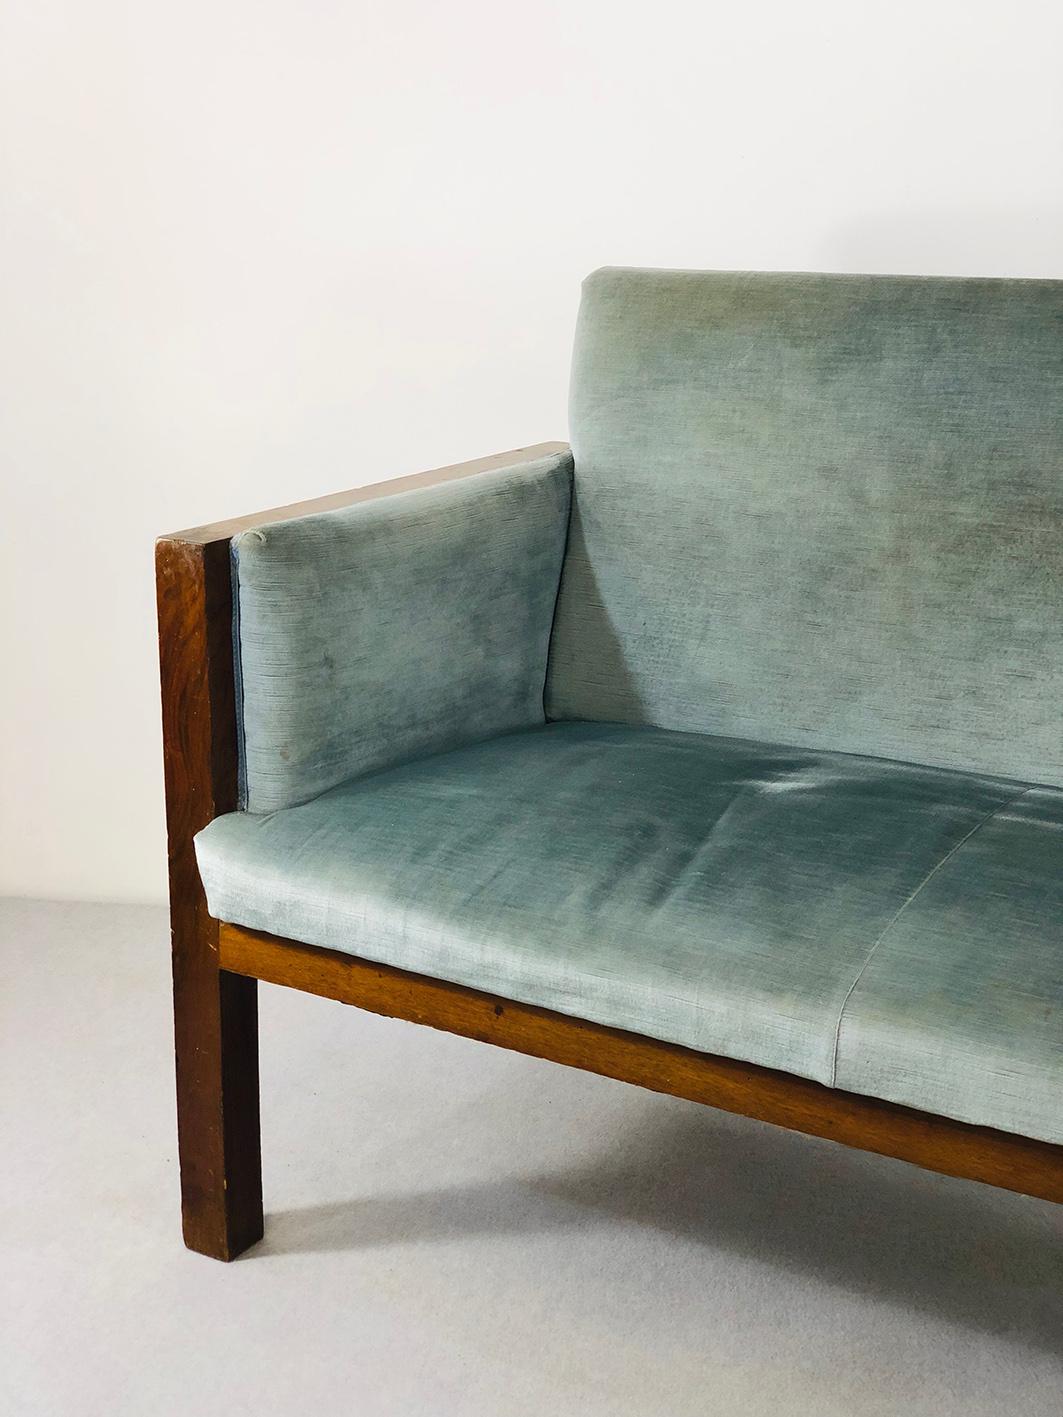 Beautiful three-seat sofa from 1940 attributed to Franco Albini in rosewood.
The fabric used for the padding of the sofa Franco Albini is original of the time, fine velvet in sugar paper color. It is ideal to complete a vintage decor in the living